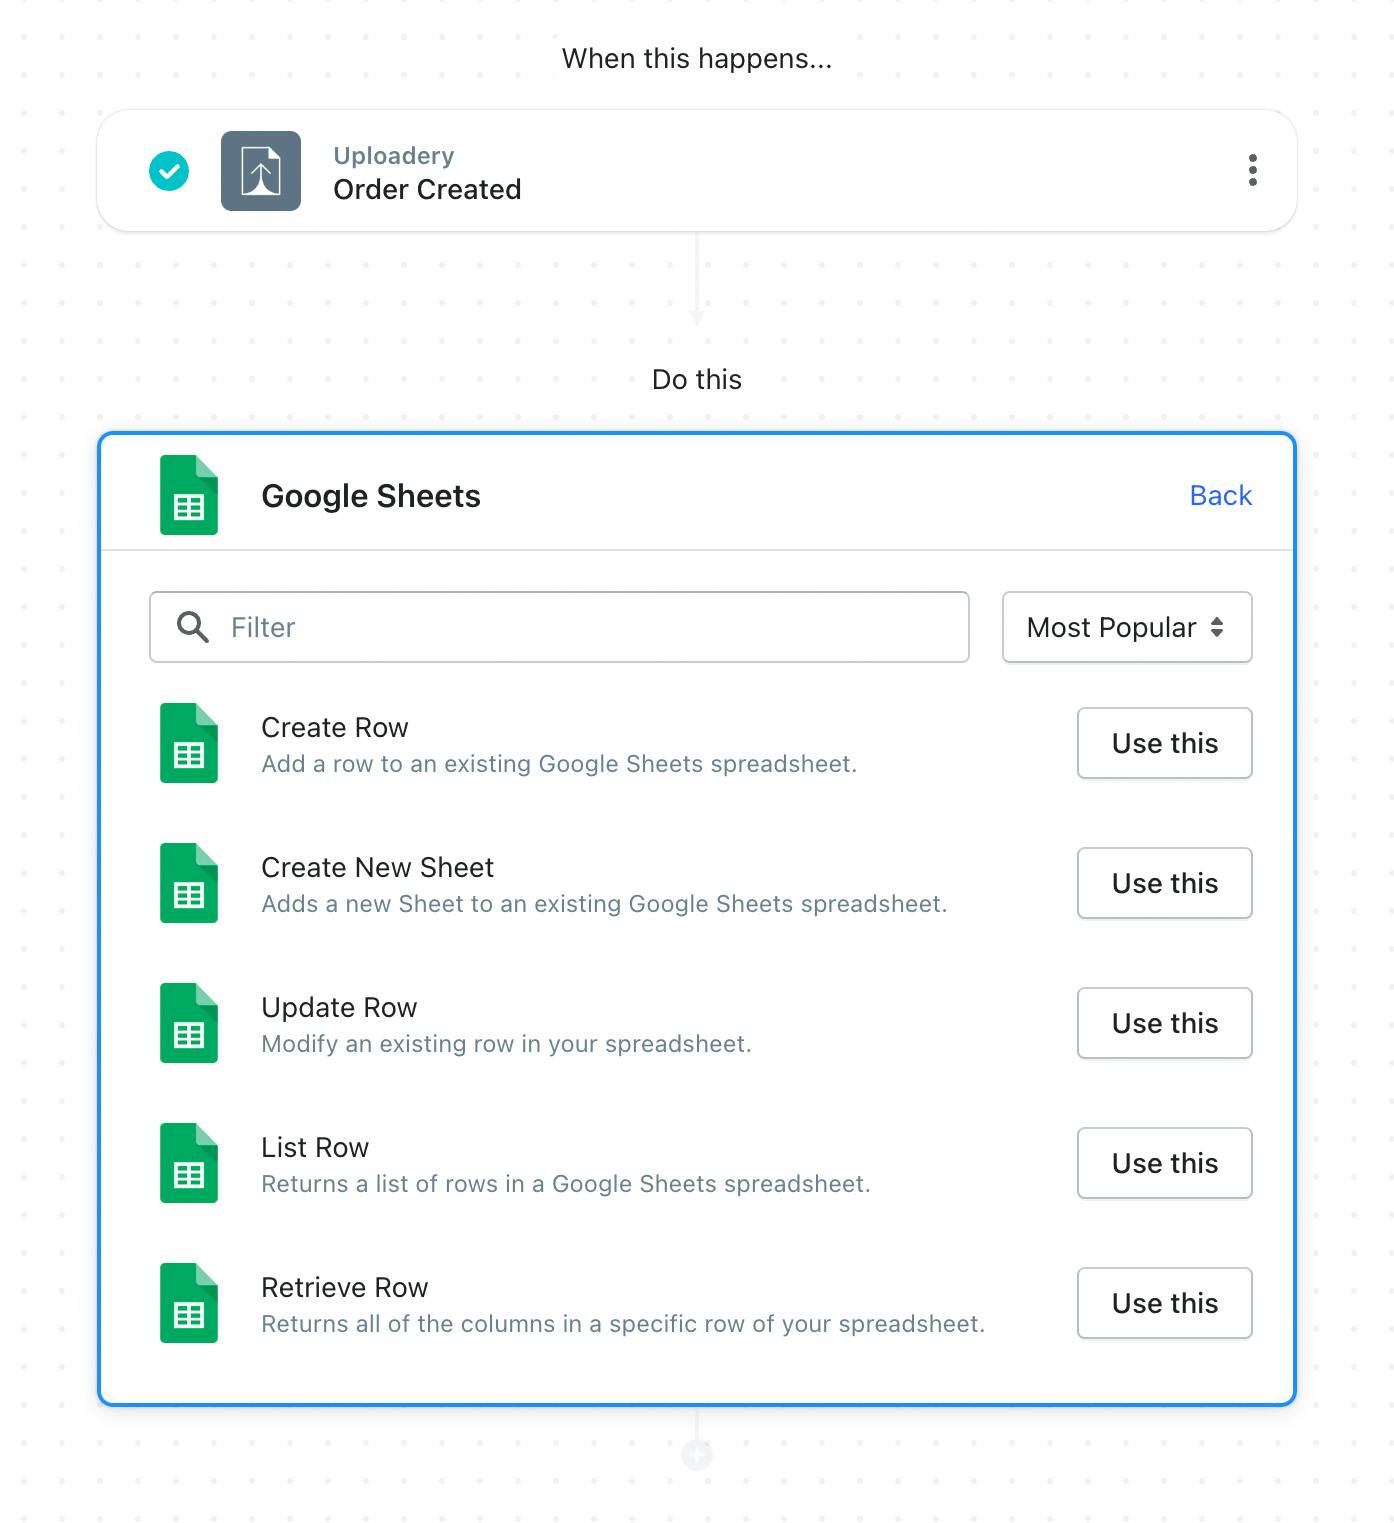 Uploadery to Google Sheets workflow